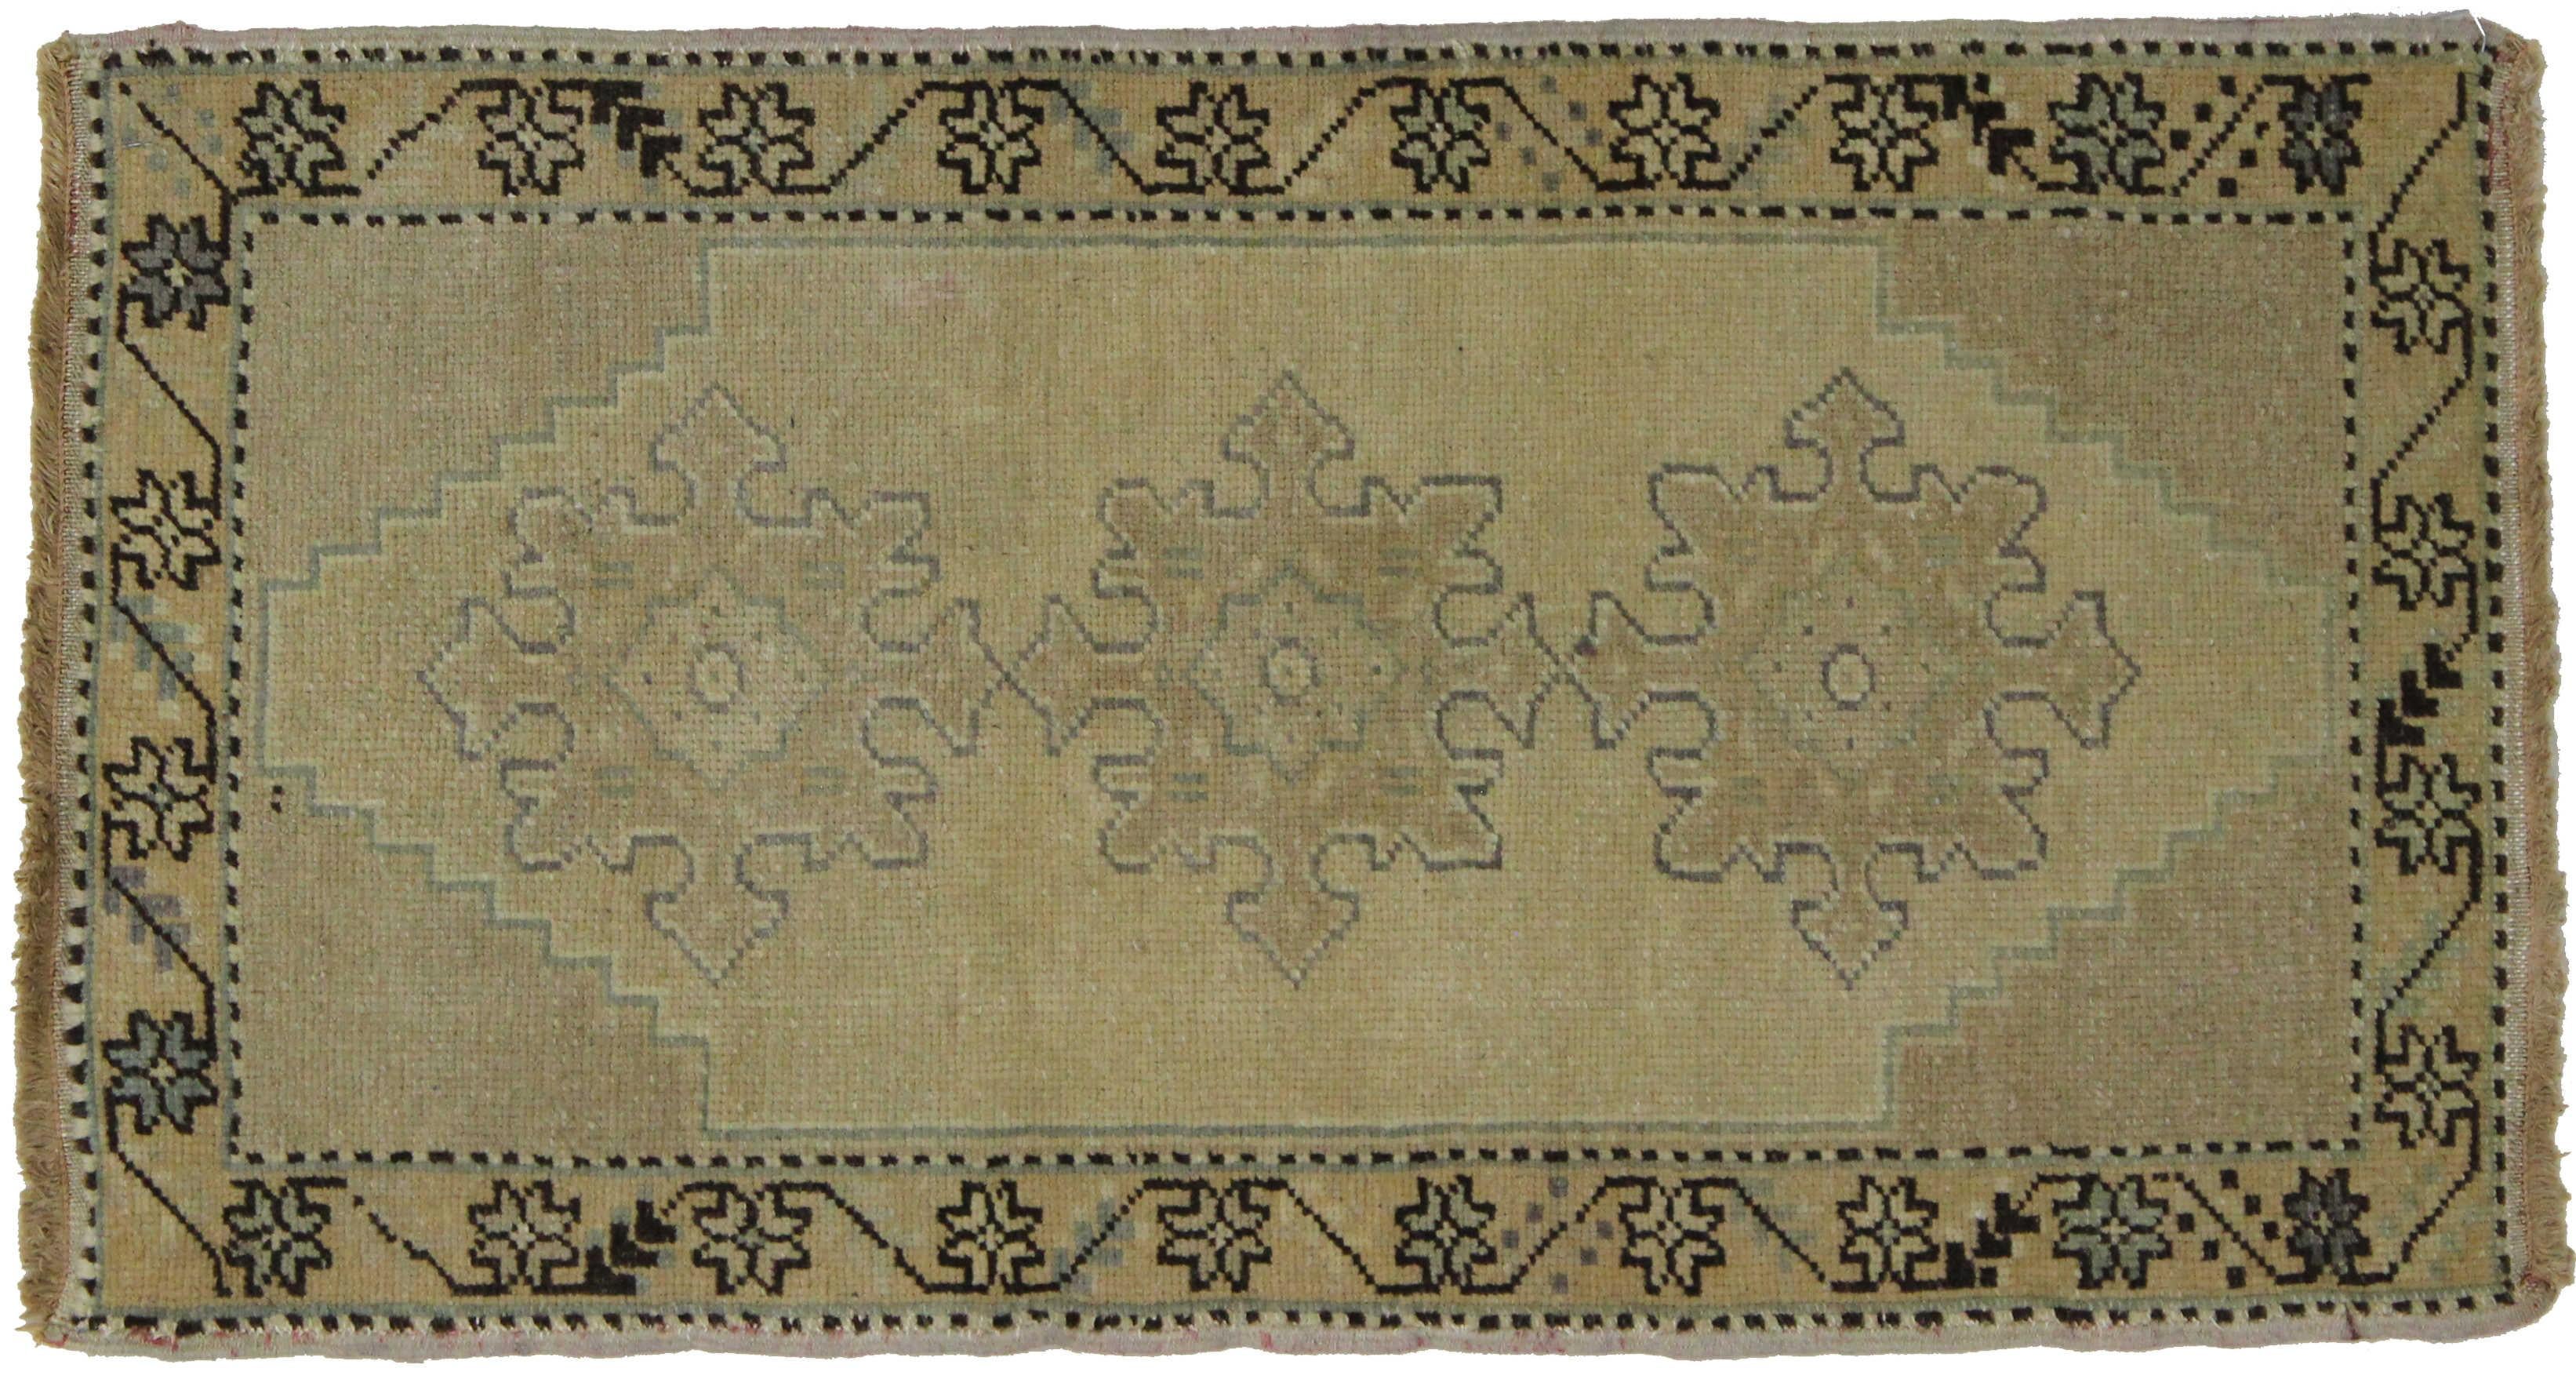 50952, vintage Turkish Oushak rug Yastik Accent rug. This vintage Turkish Oushak rug features a modern traditional style. Immersed in Anatolian history and refined colors, this vintage Oushak rug combines simplicity with sophistication. Impeccably